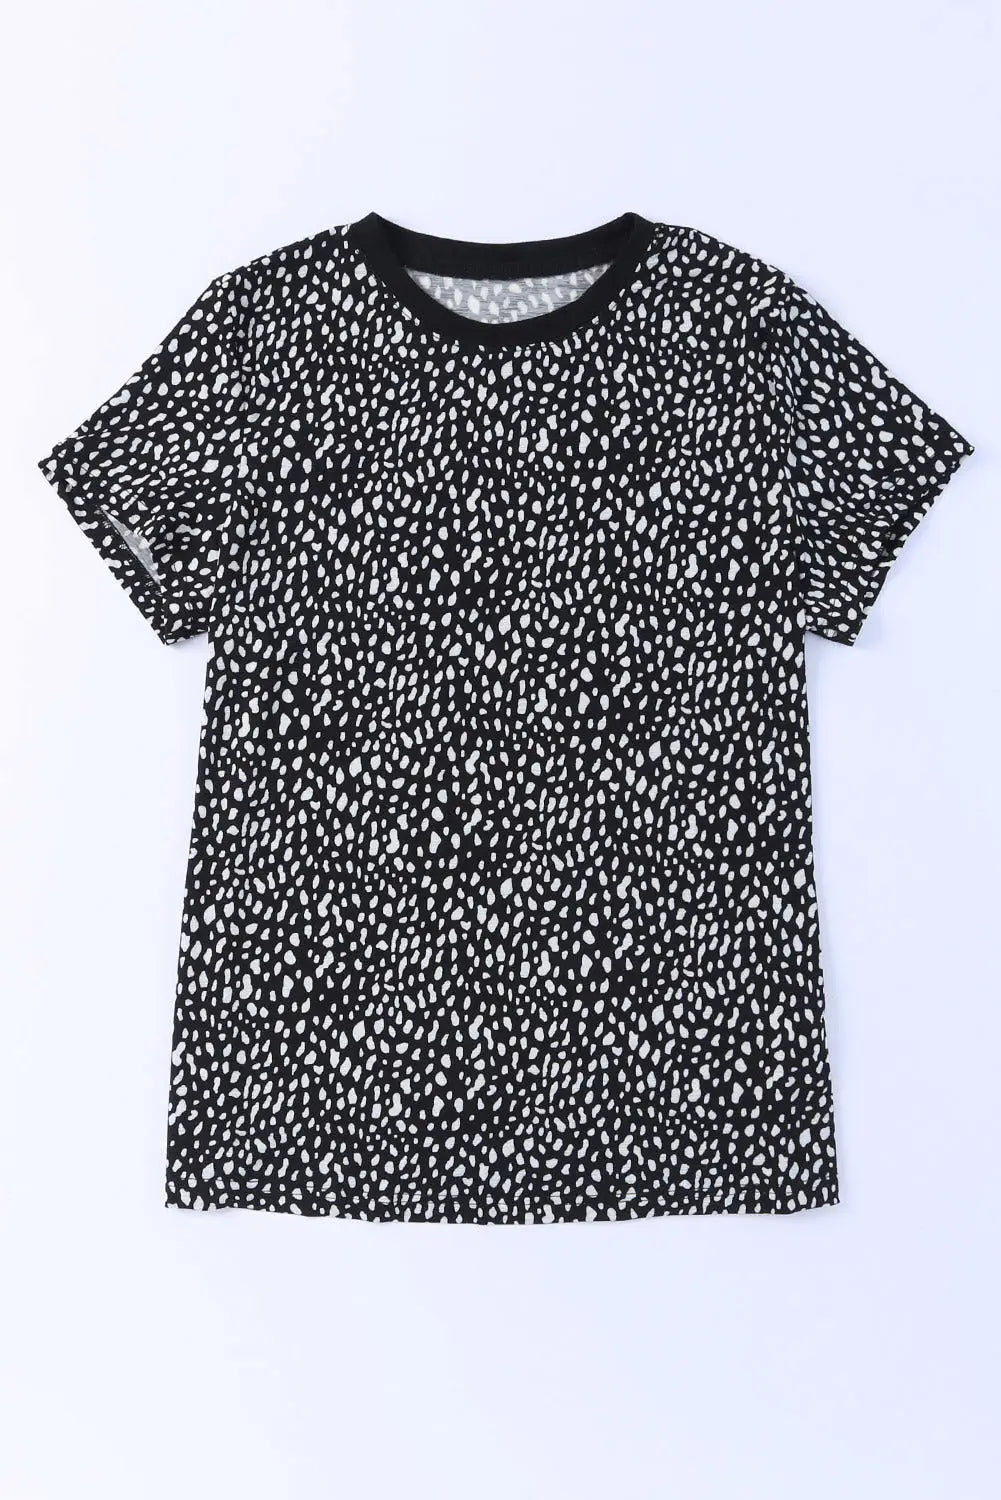 Animal Spotted Print Round Neck Long Sleeve Top-55